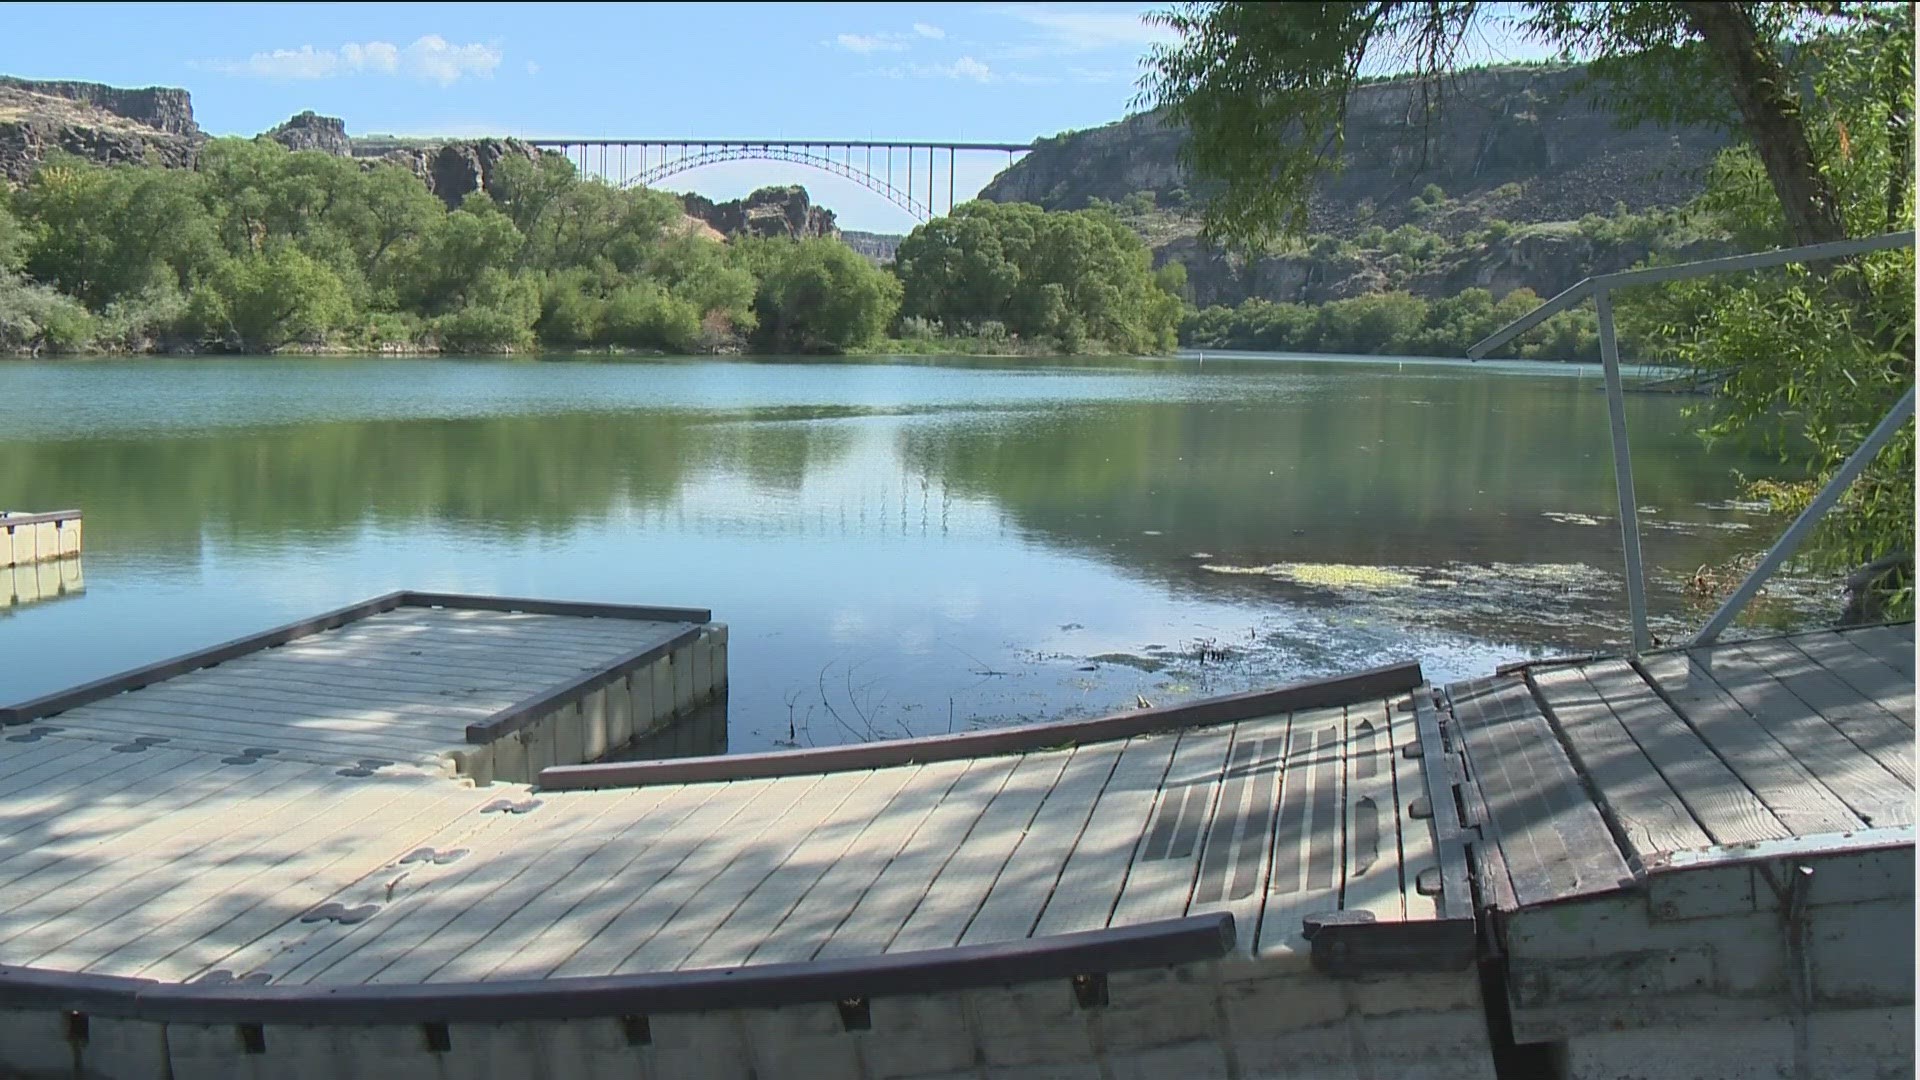 As part of Idaho's emergency response to the invasive species, state officials close a portion of the Snake River to fishing of any kind until Friday evening.